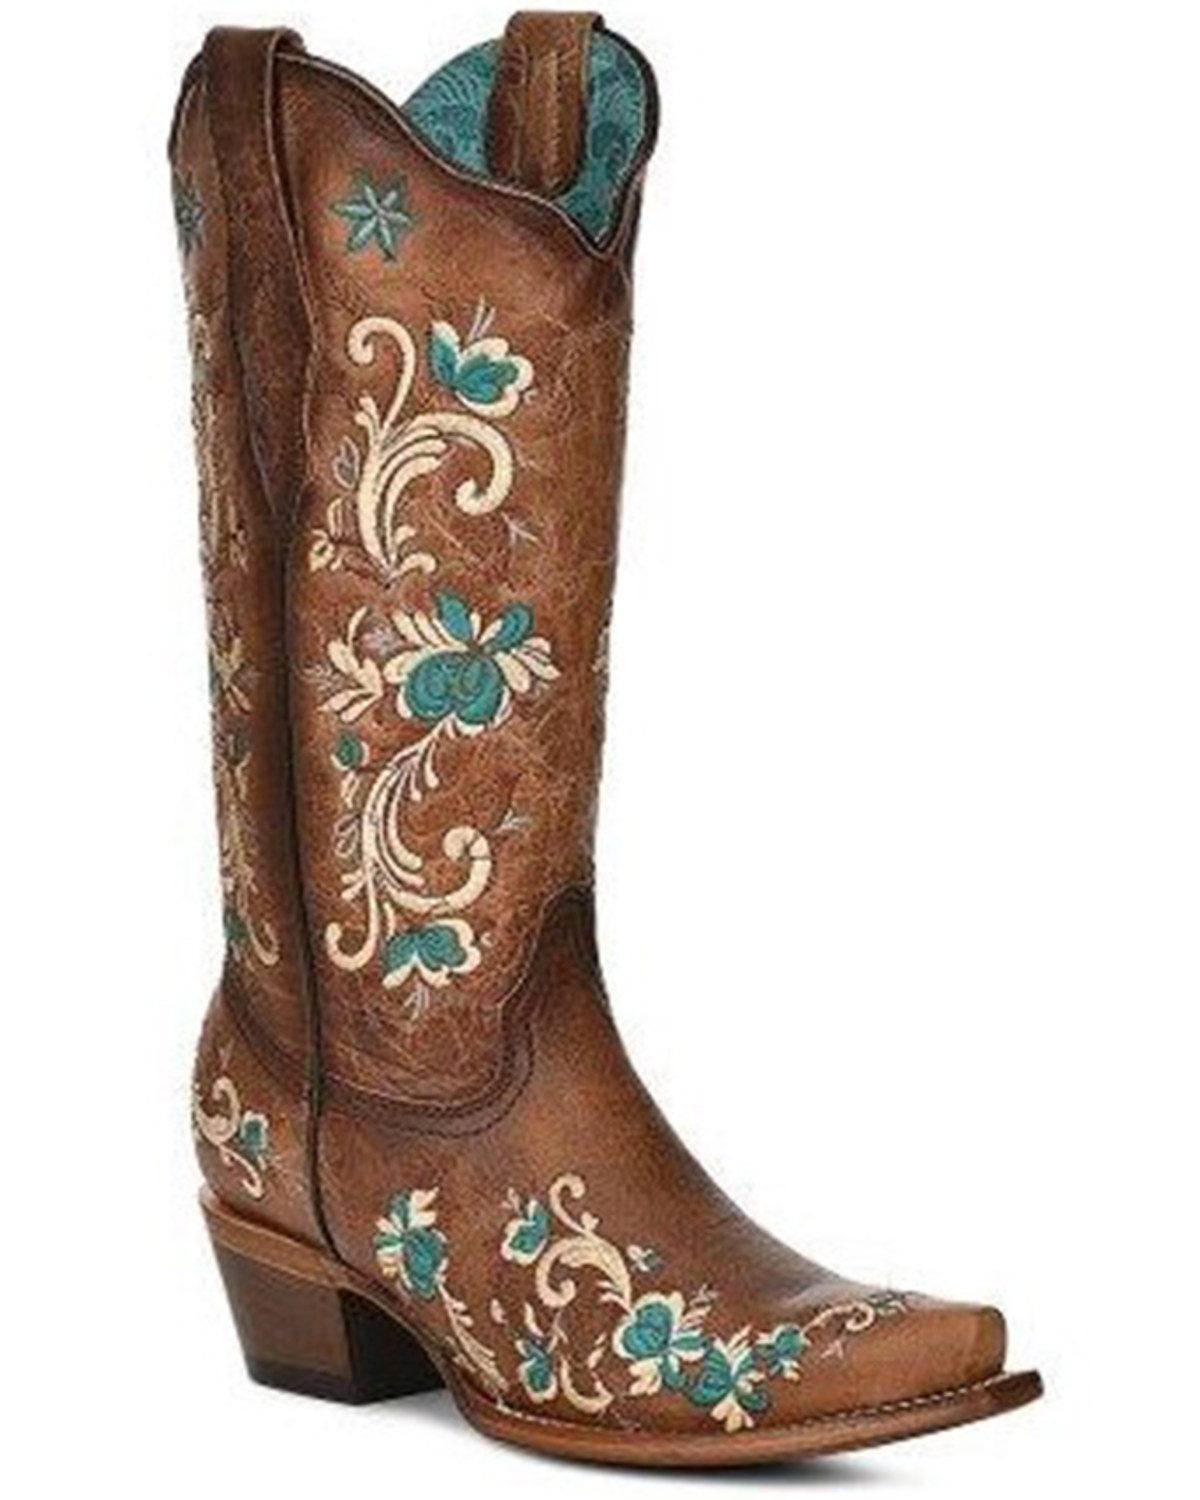 Corral Women's Floral Western Boots - Snip Toe